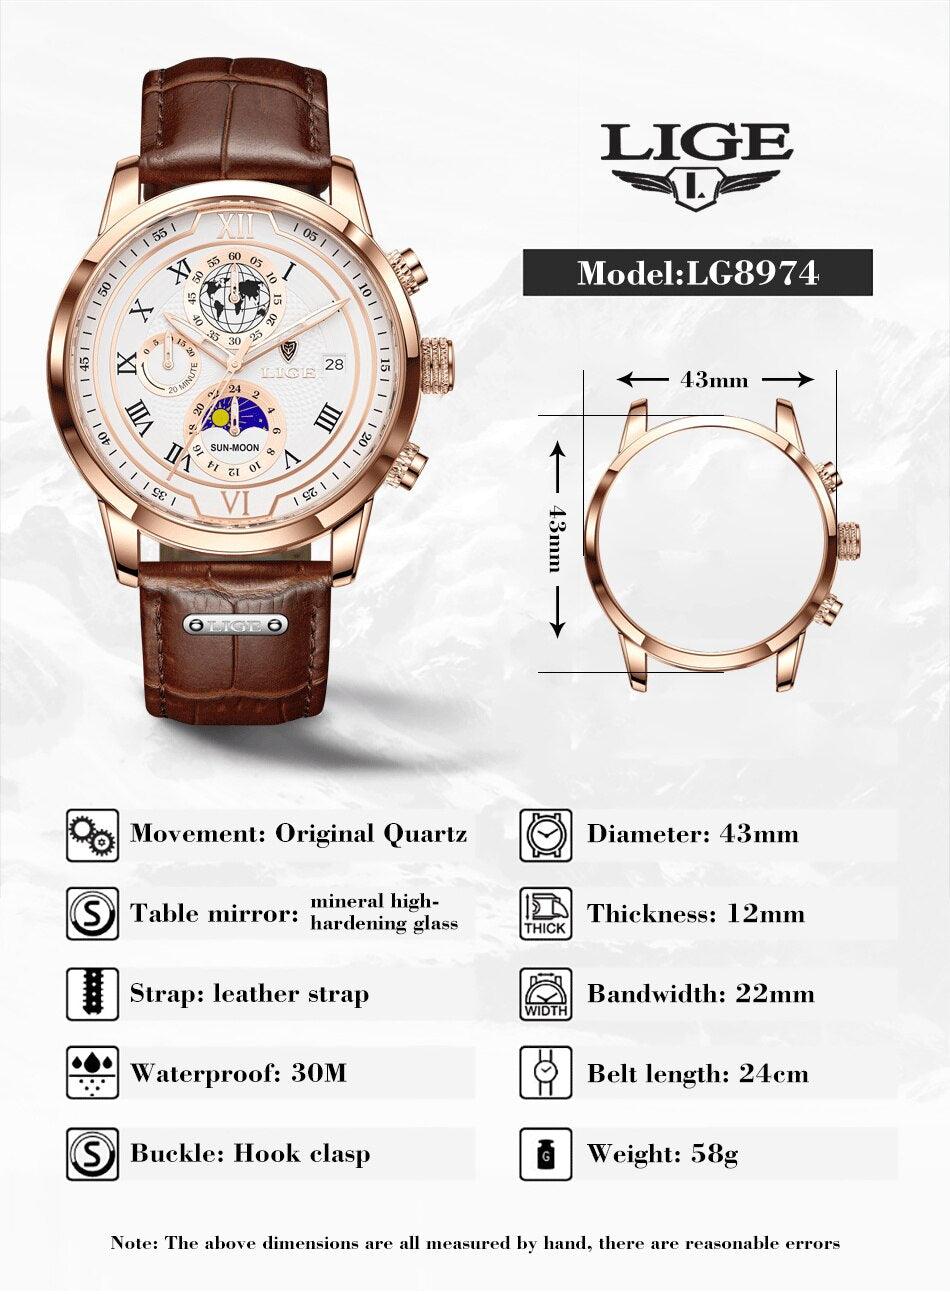 NEW MENS WATCHES - Top Brand Leather Chronograph Waterproof Sport Automatic Date Quartz Watch - The Jewellery Supermarket